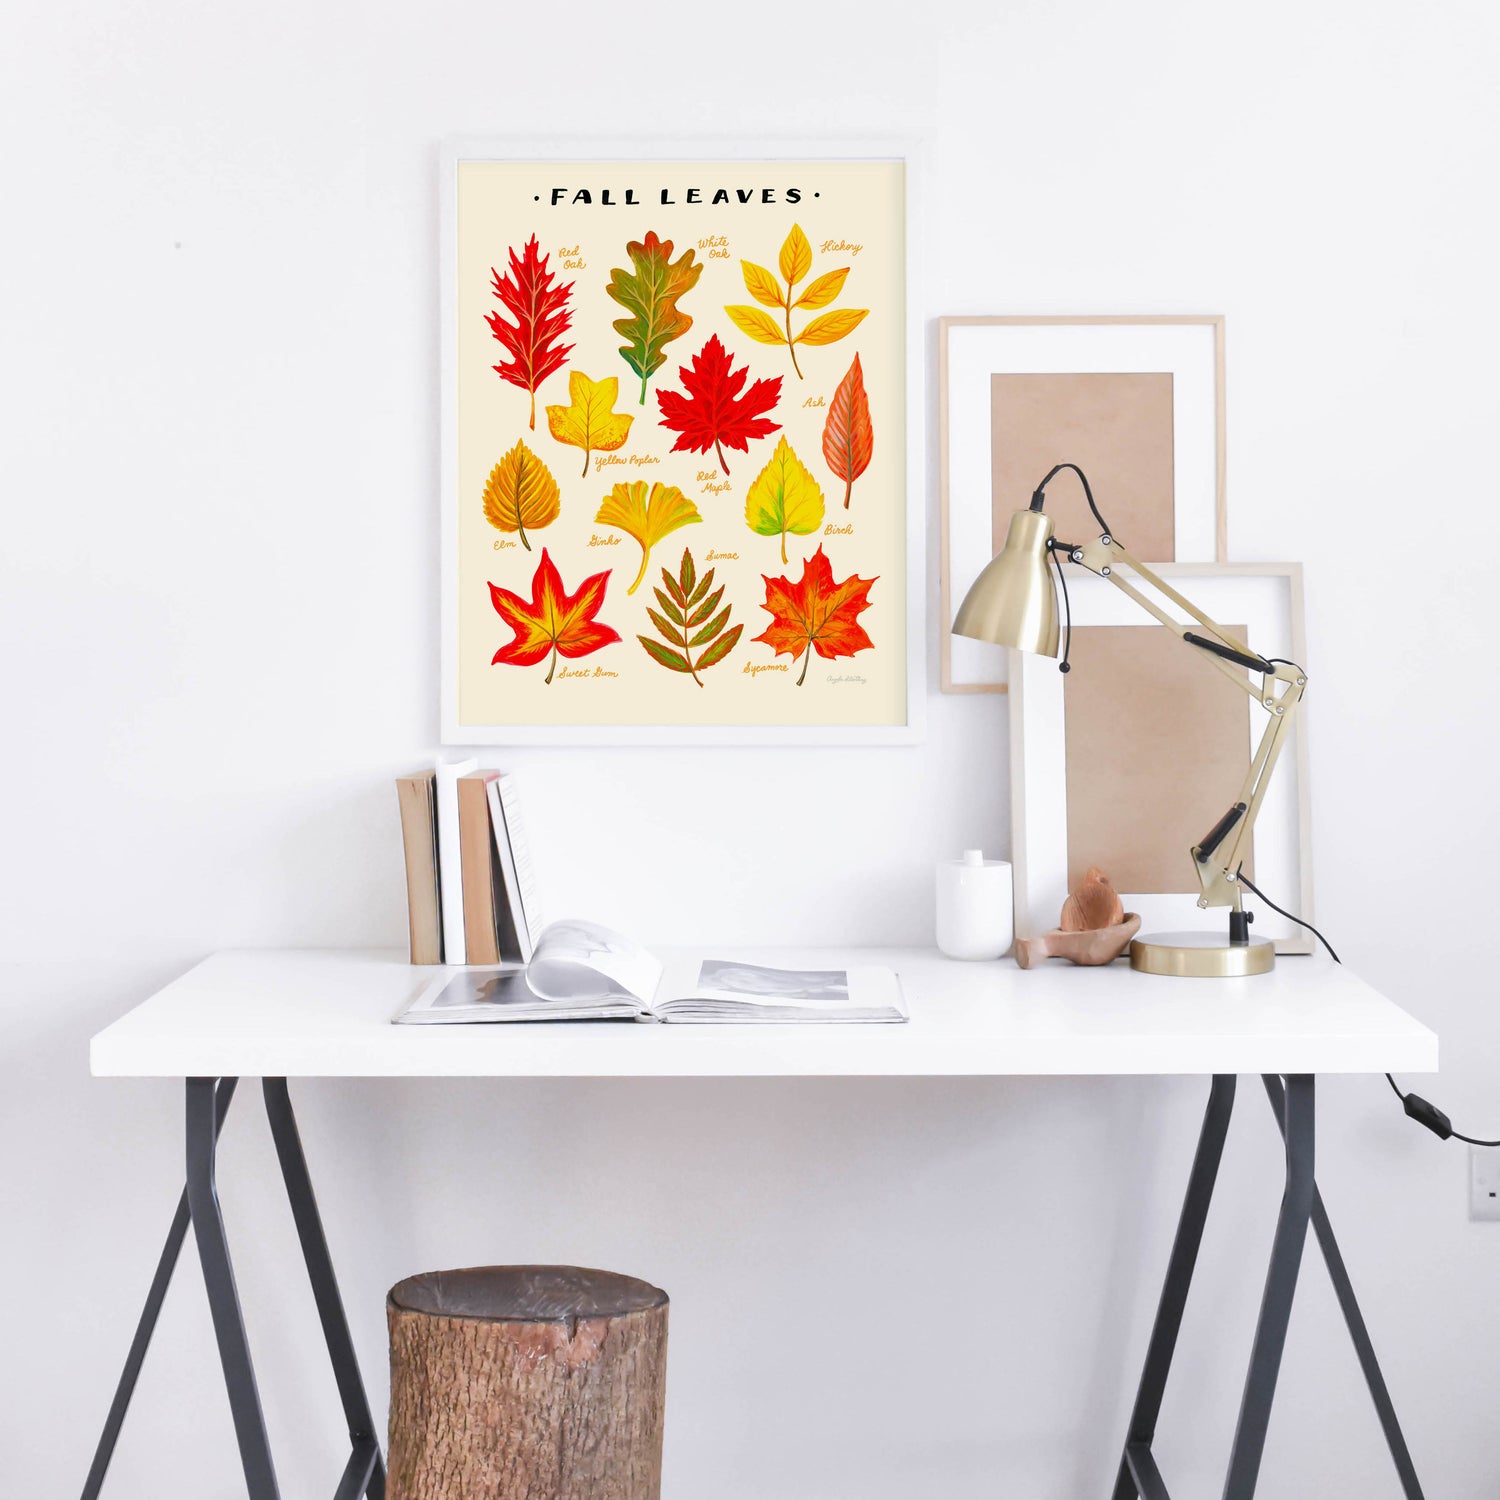 Colorful fall leaves illustration in a white frame above a desk